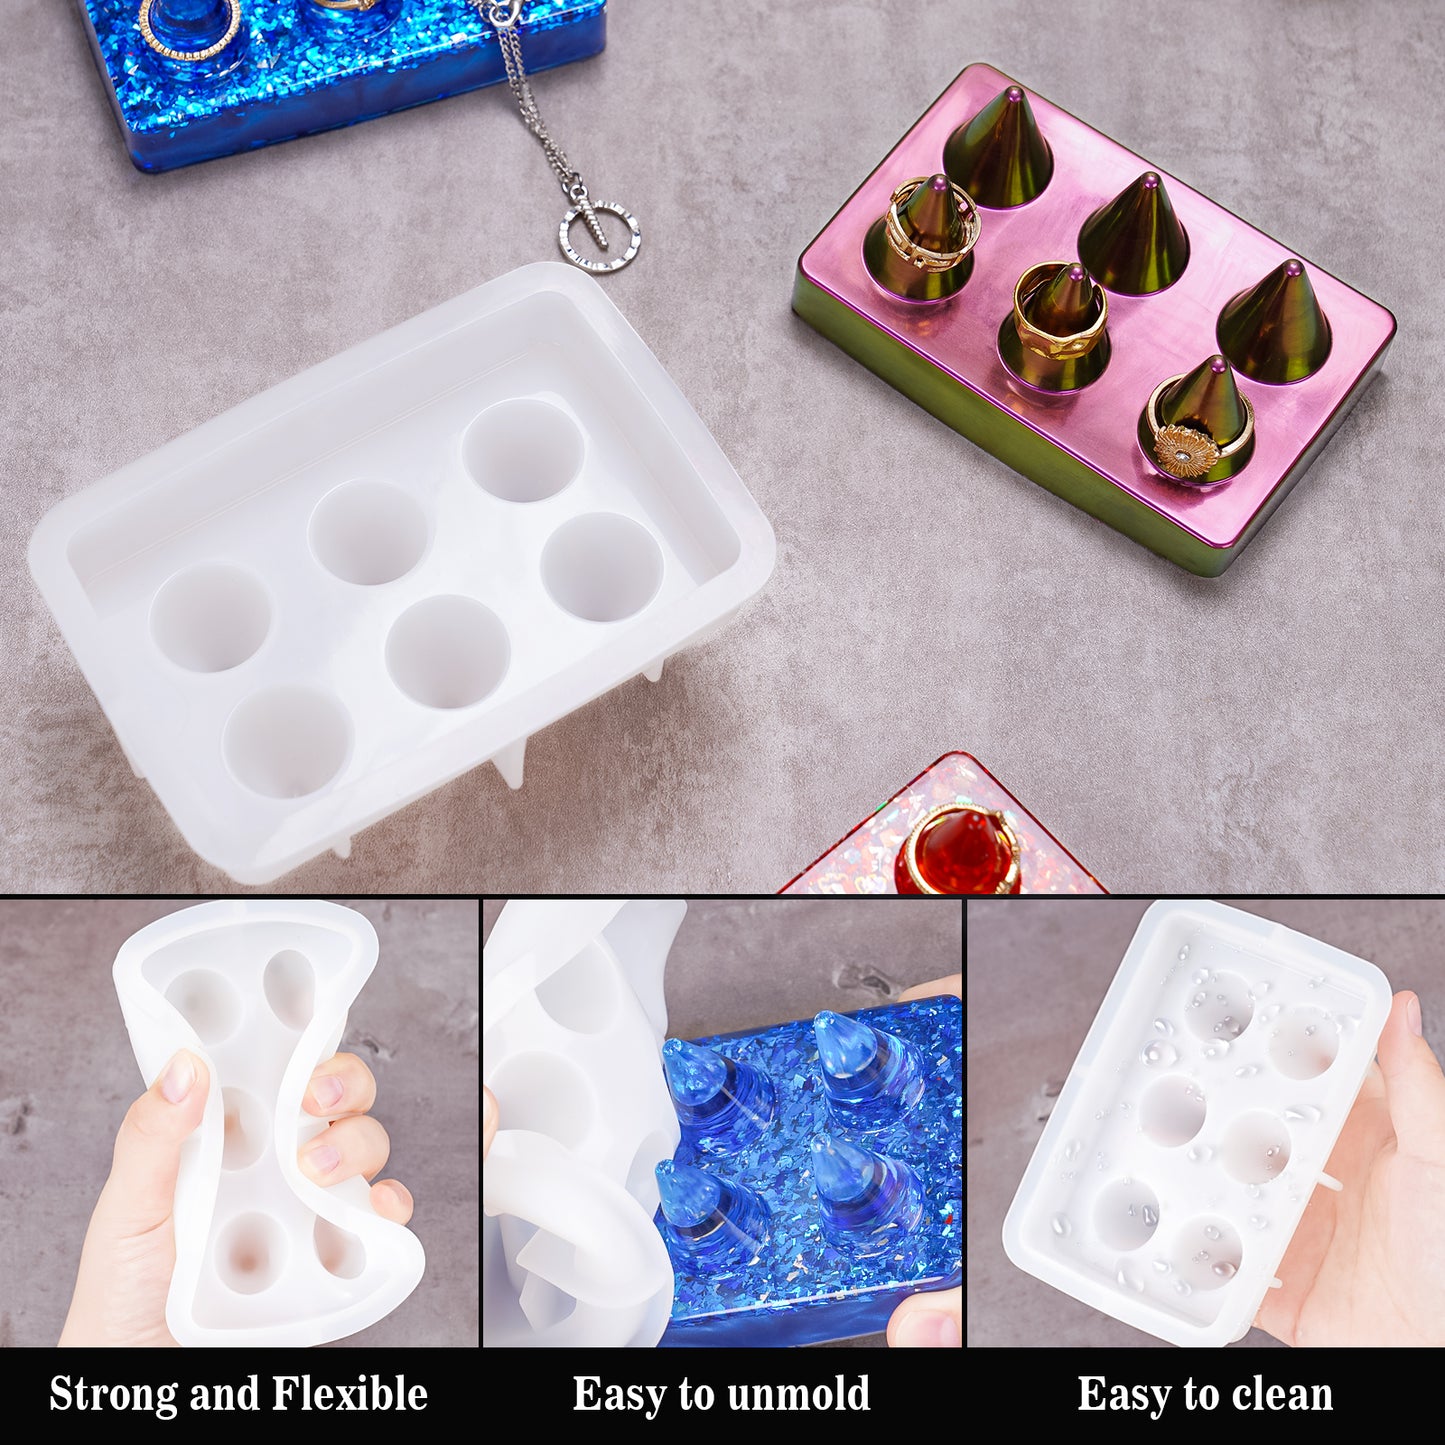 6-Cone Ring Display DIY Epoxy Resin Casting Mold Kit with Fine Glitters, Jewel